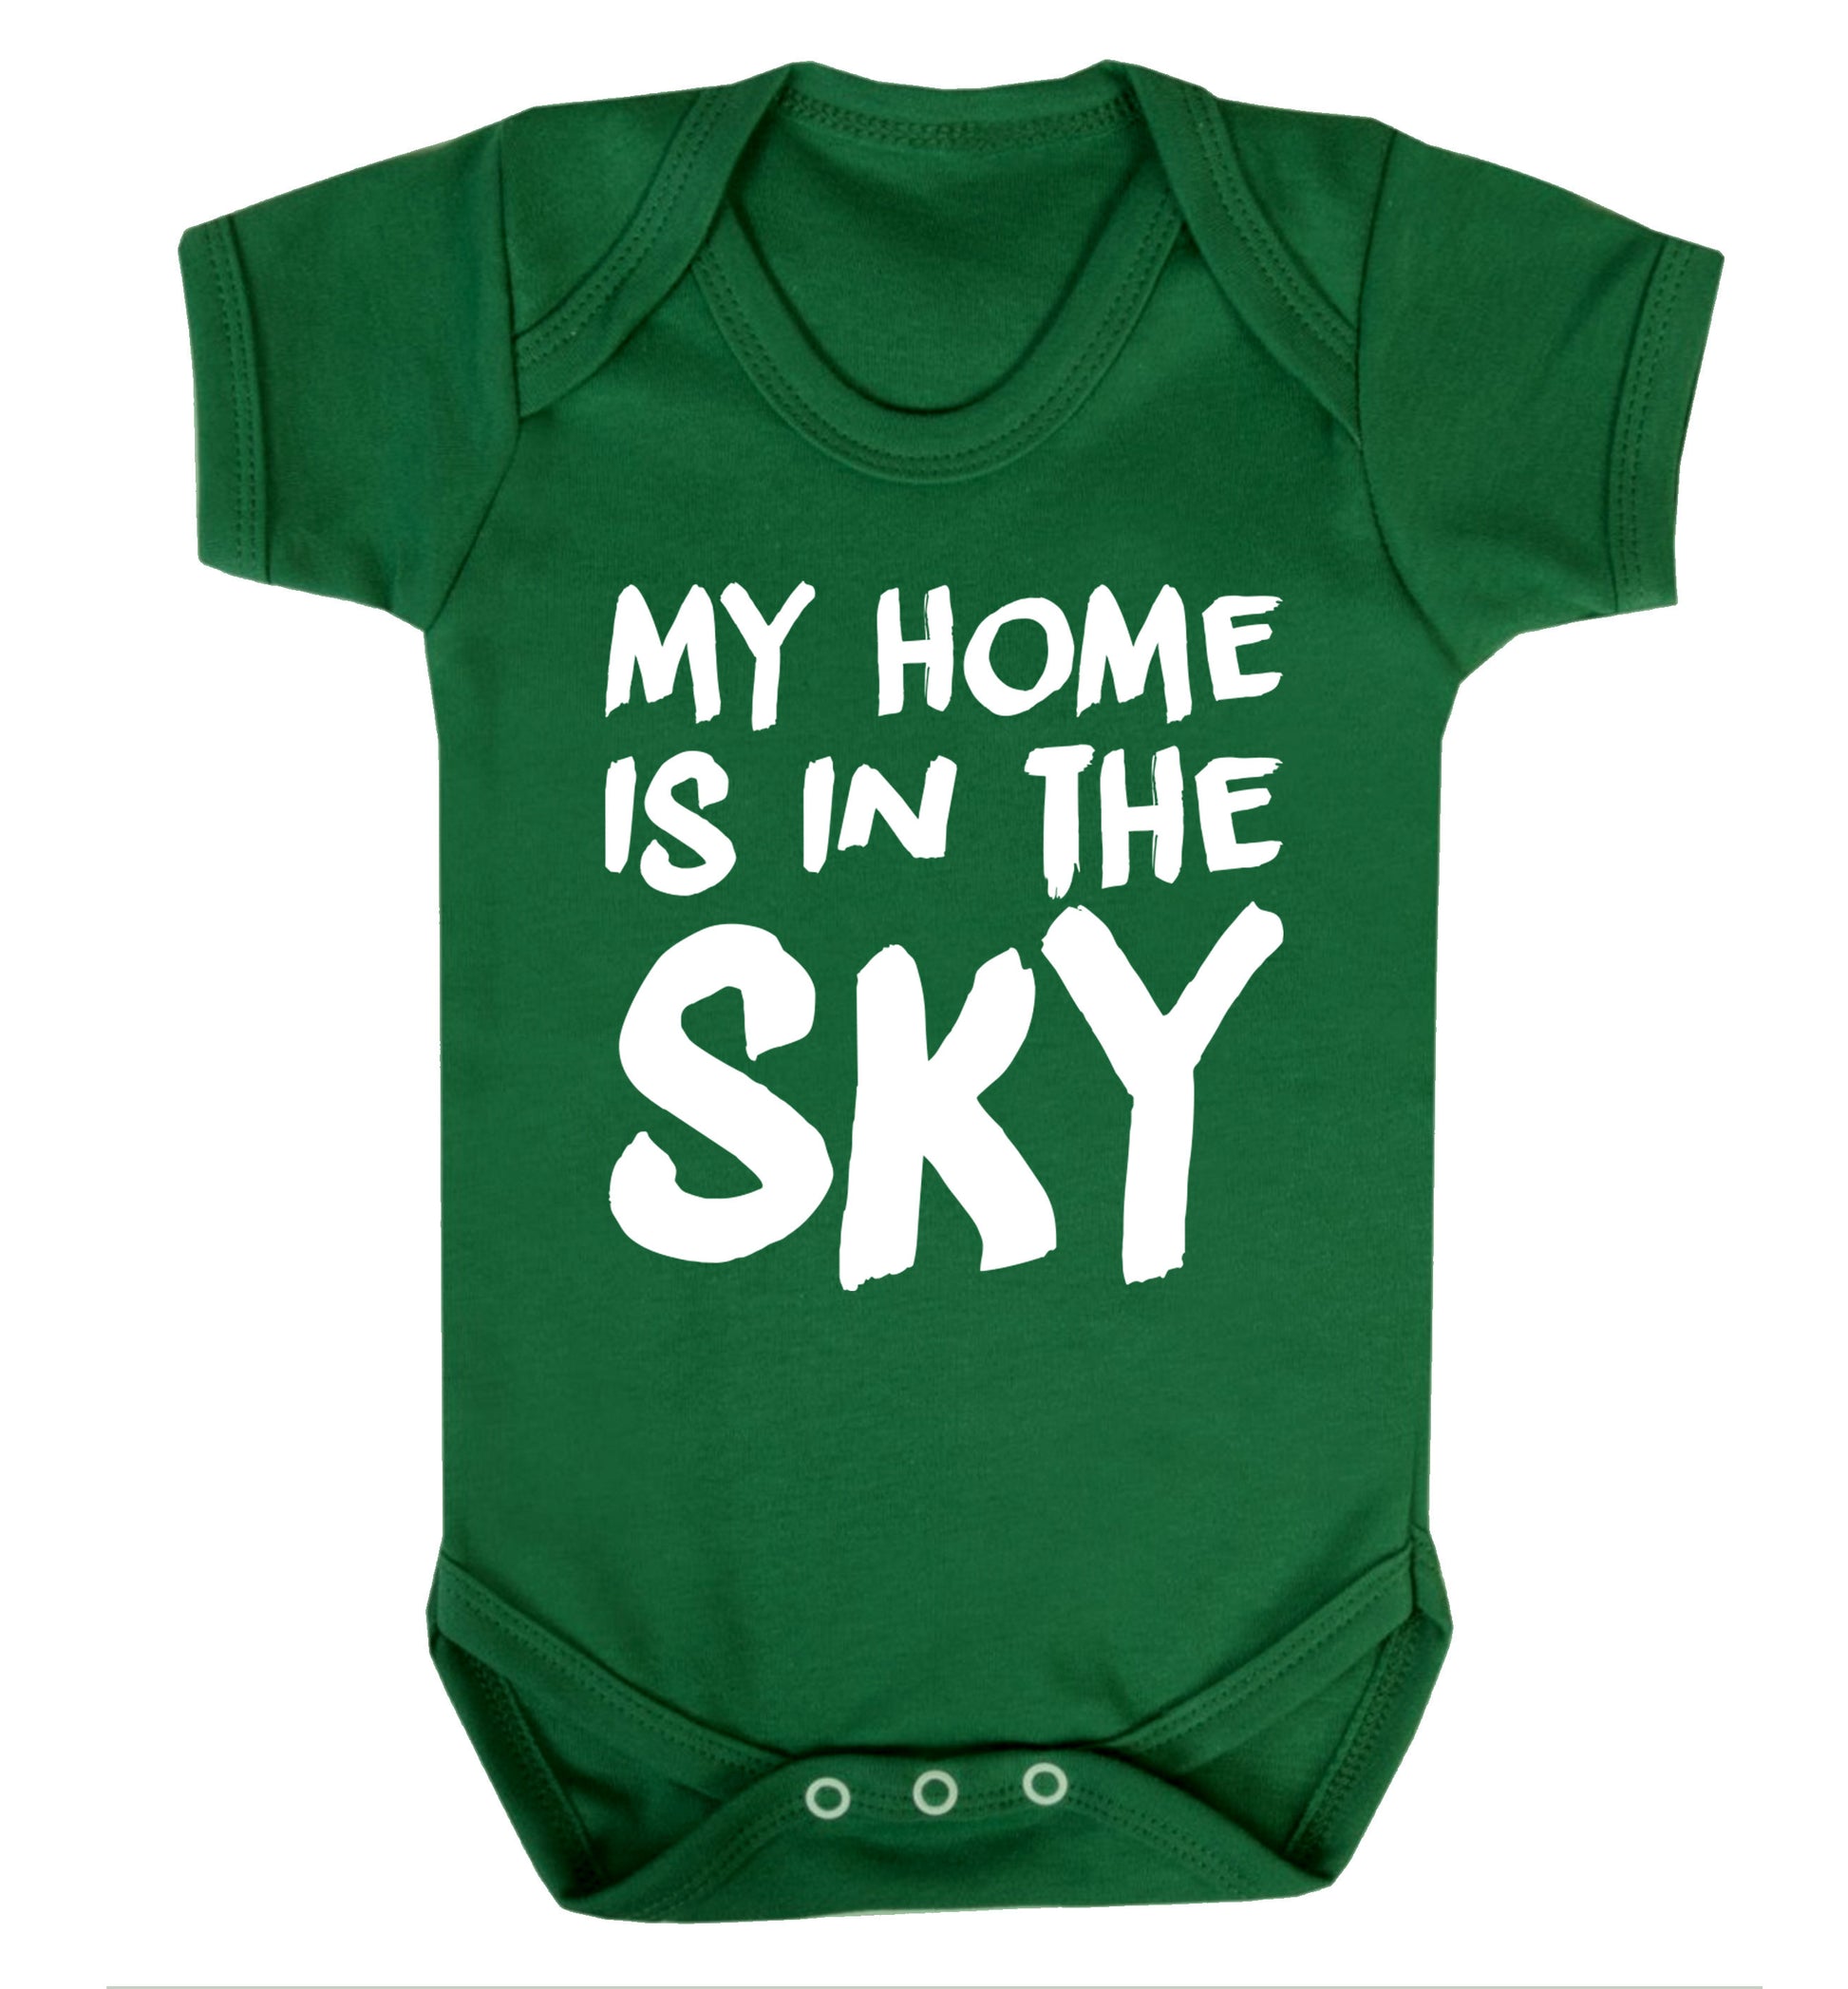 My home is in the sky Baby Vest green 18-24 months